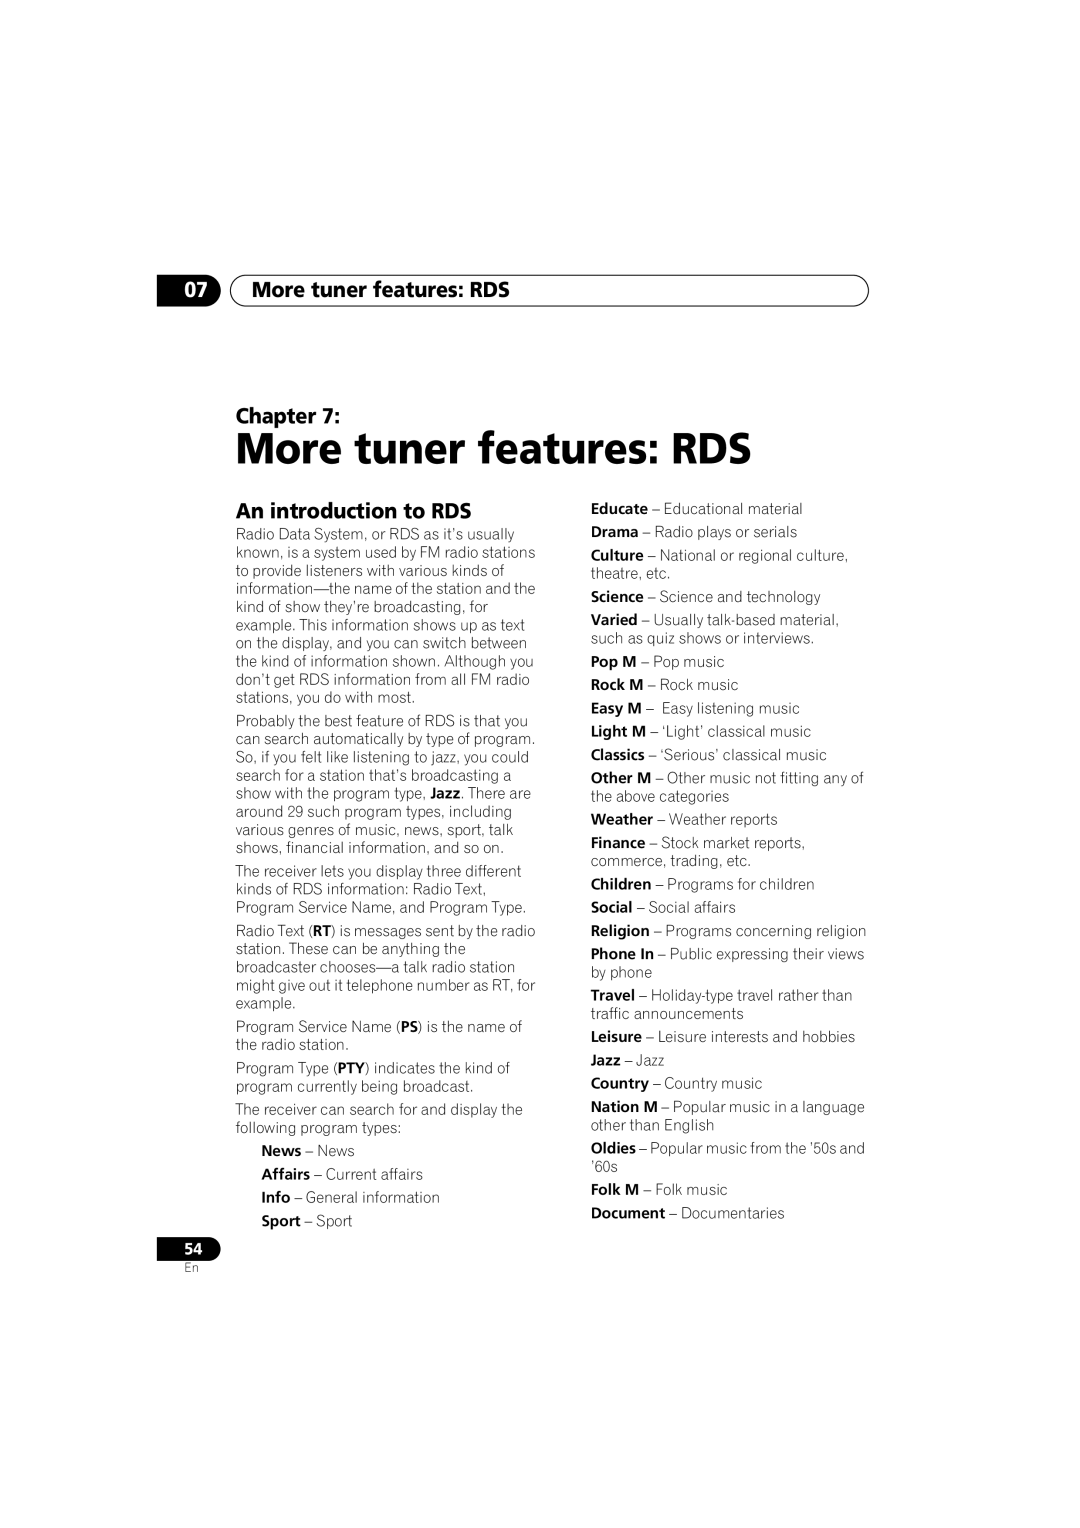 Pioneer S-DV990ST, S-DV99ST manual 07More tuner features: RDS Chapter, An introduction to RDS 